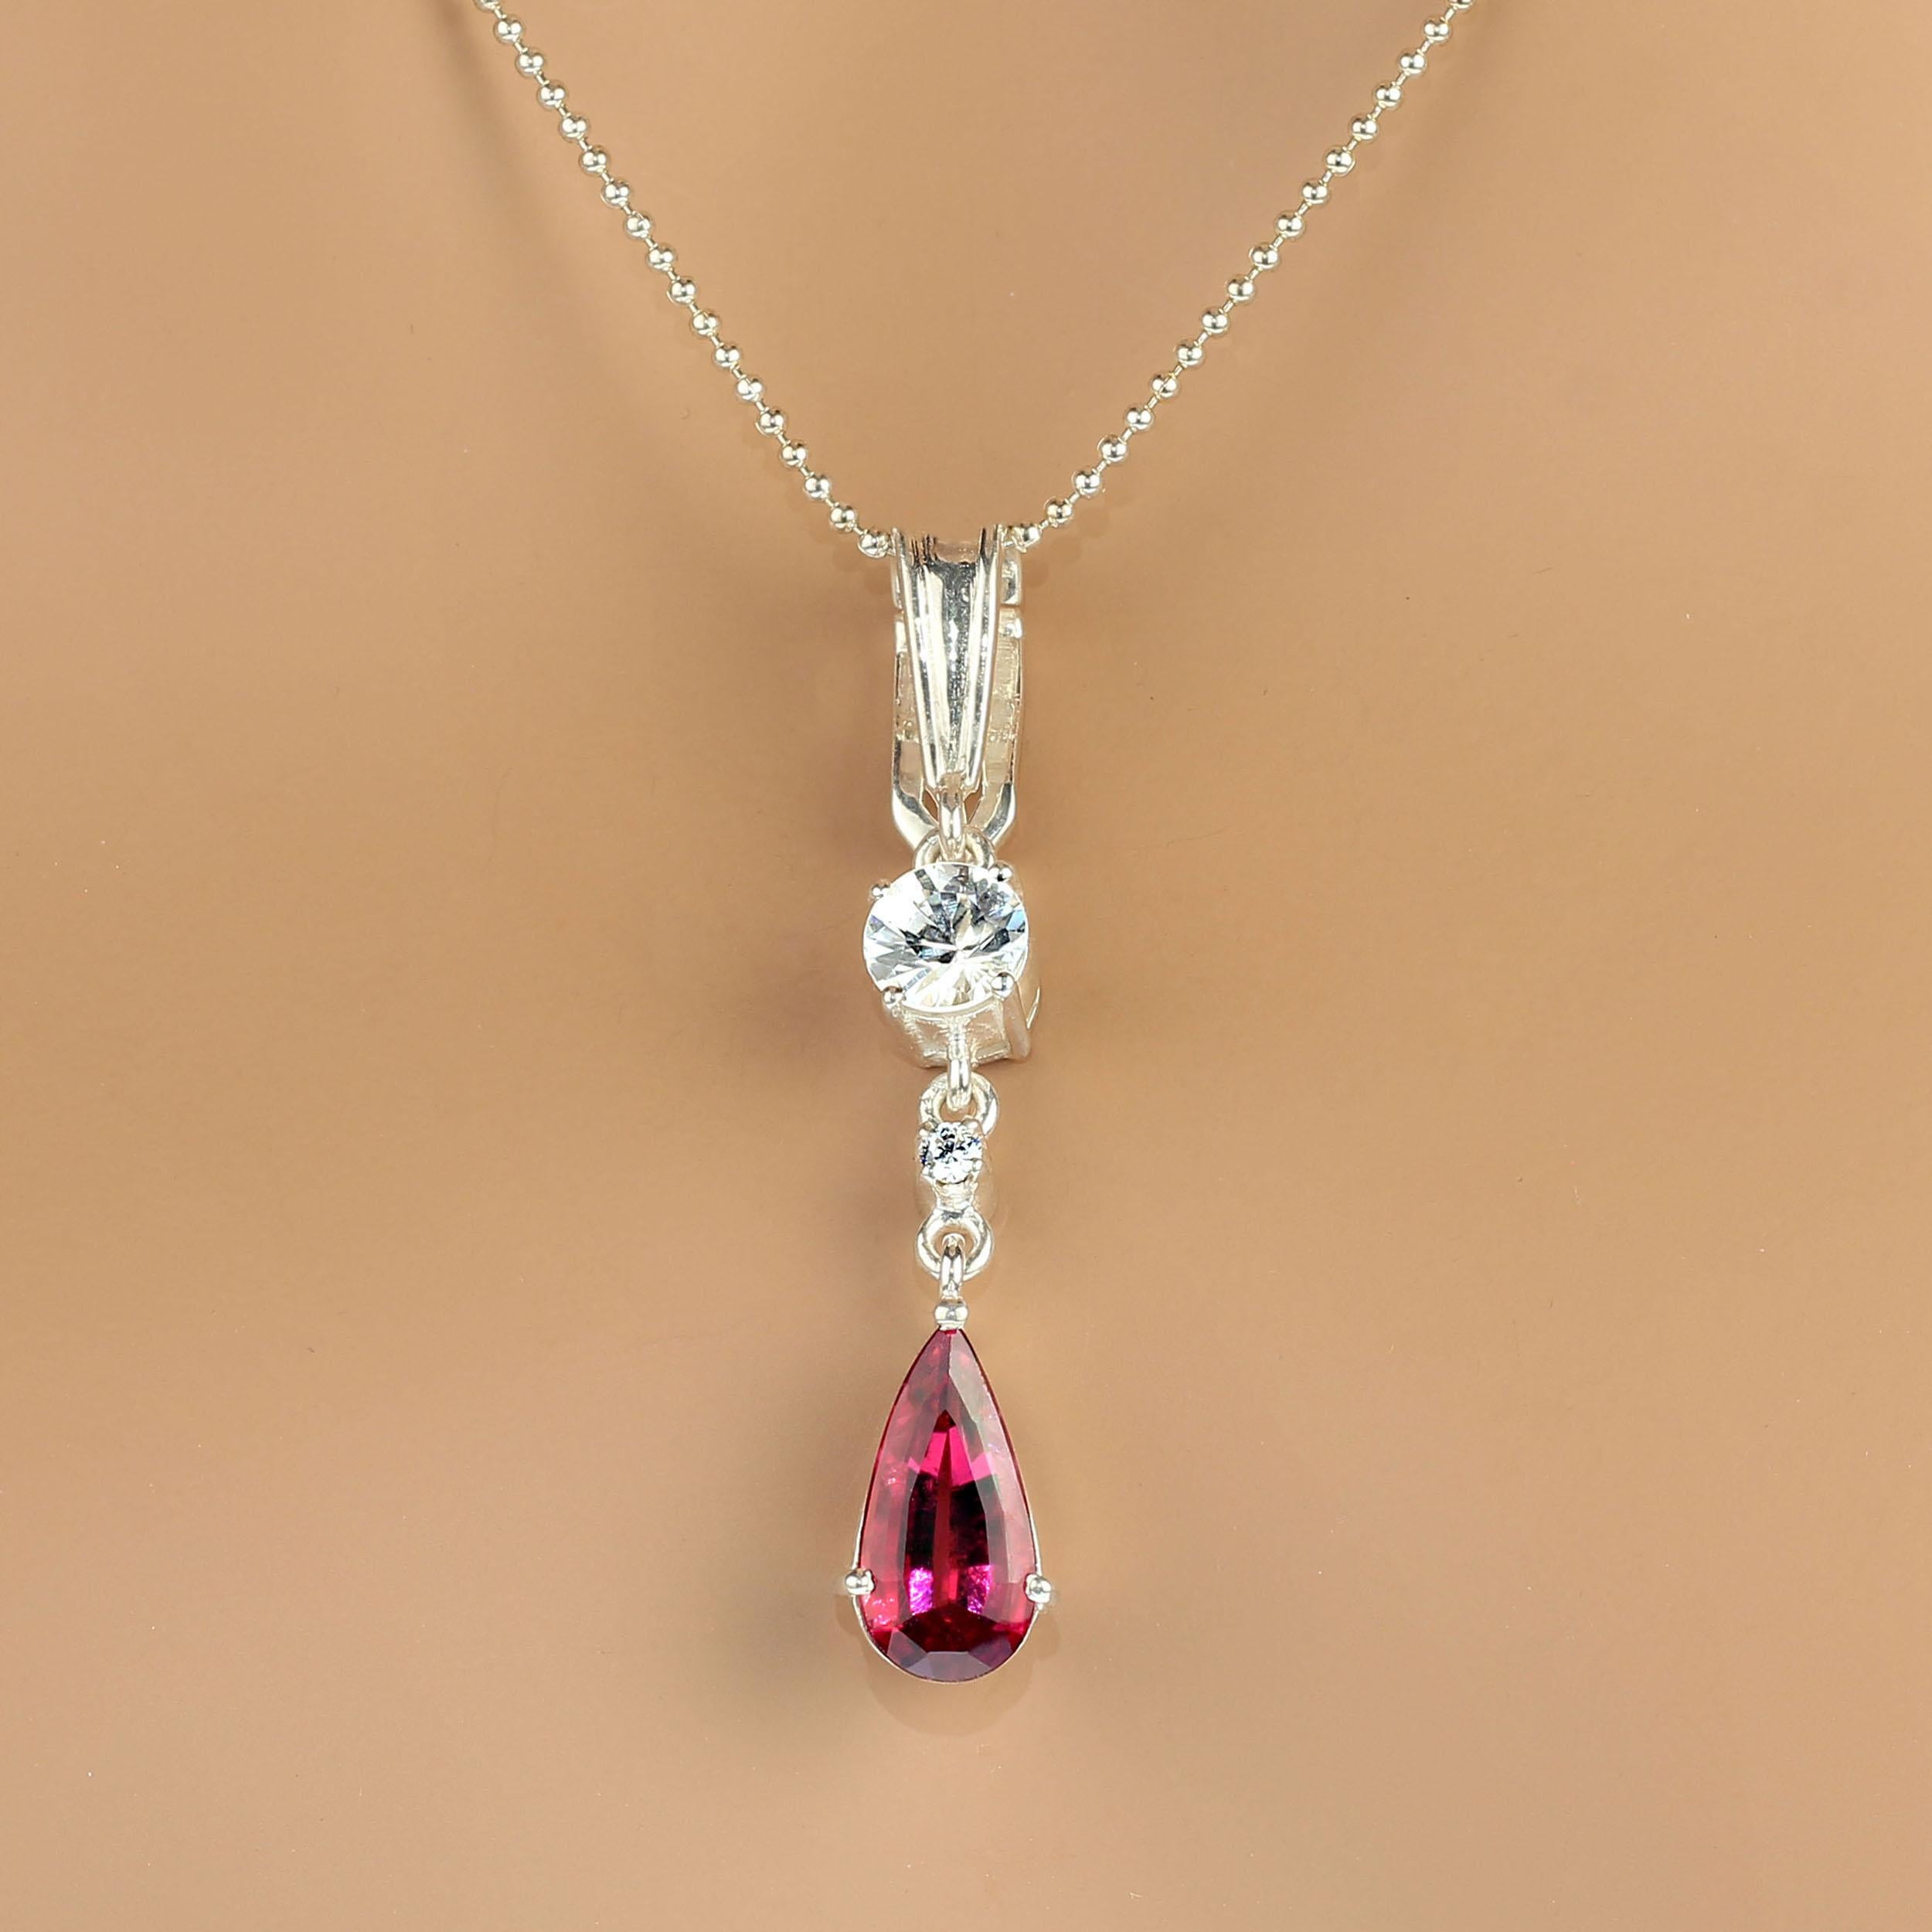 Lovely, long pendant of 1.75 inches in glowing rubelite and sparkling genuine zircon.  This gorgeous teardrop shaped rubelite is from one of our favorite vendors in the mountains outside of Rio de Janeiro. We've paired it with sparkling genuine real